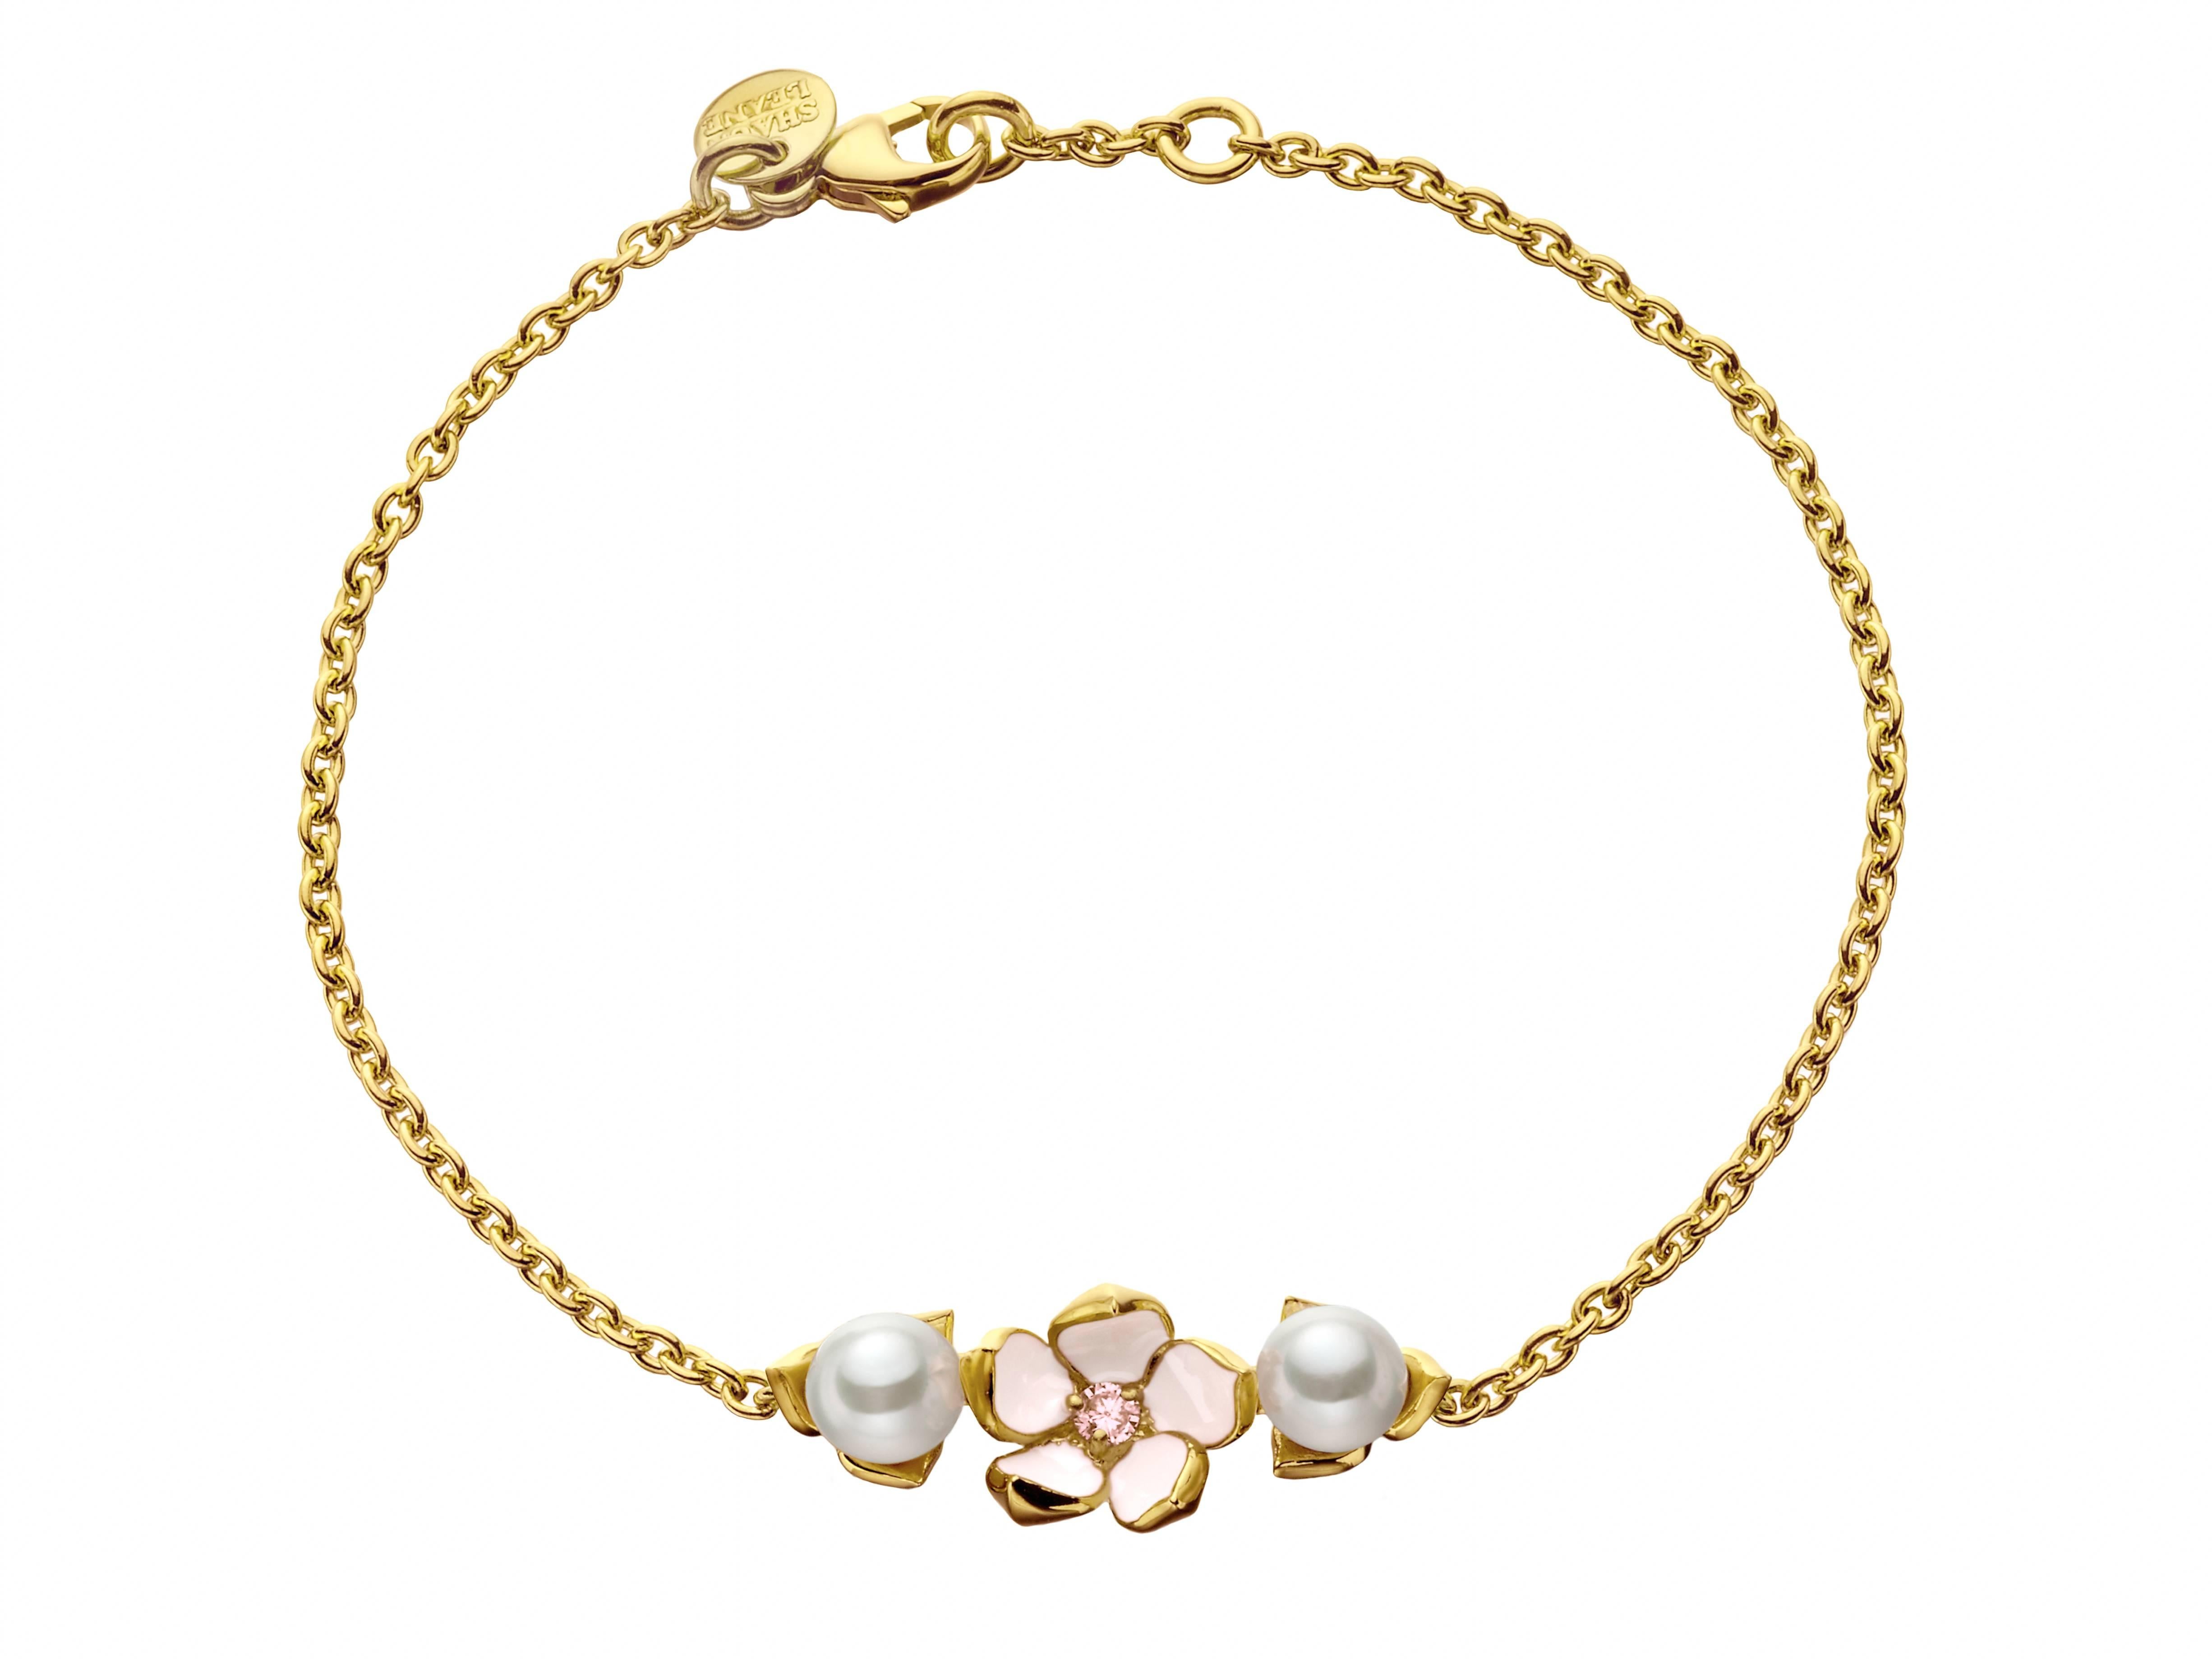 18ct yellow Gold Vermeil and Sterling Silver White Diamond, Freshwater Pearl, Enamel and Sterling Silver Single Flower Bracelet from the Shaun Leane 'Cherry Blossom' silver jewellery collection. 
Metal: Sterling silver with Yellow Gold Vermeil 
2